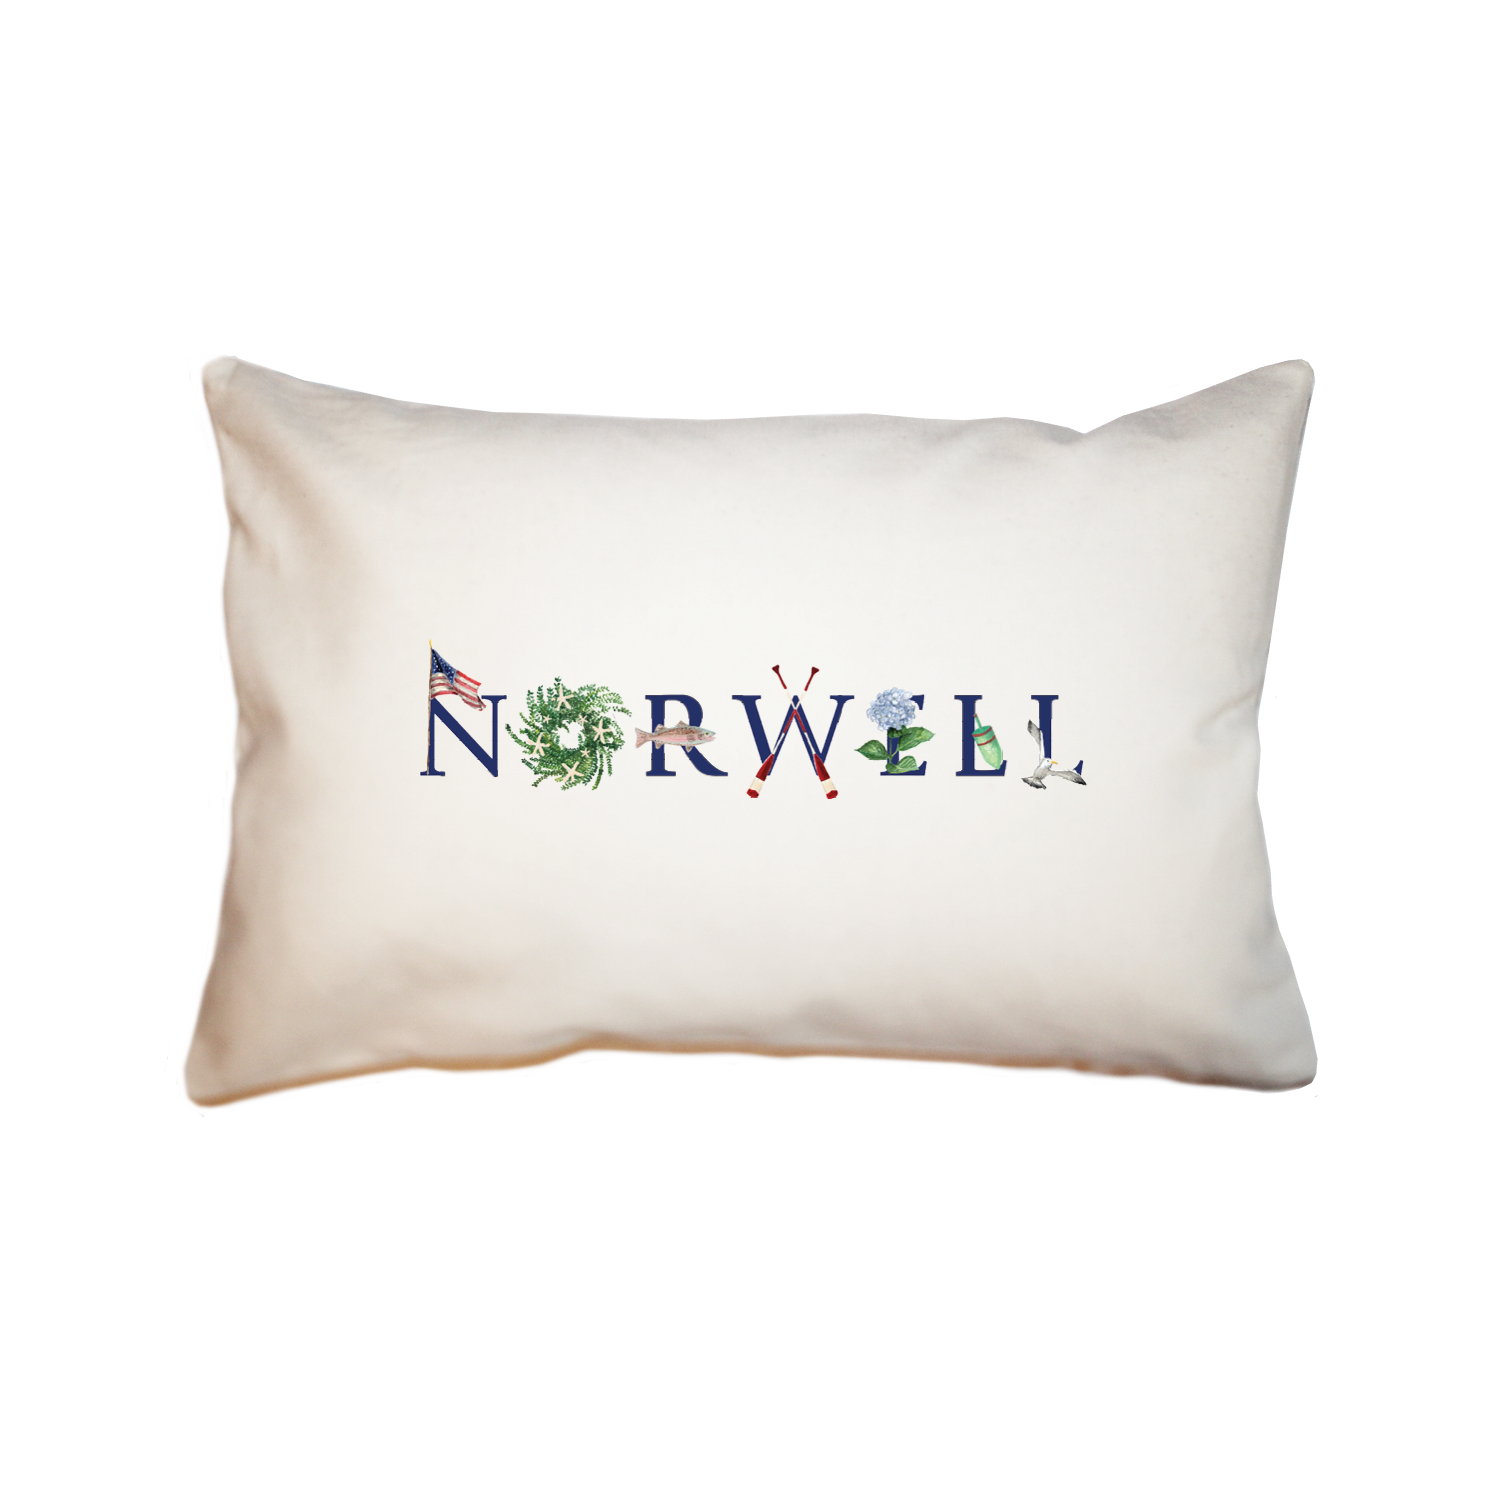 Norwell large rectangle pillow